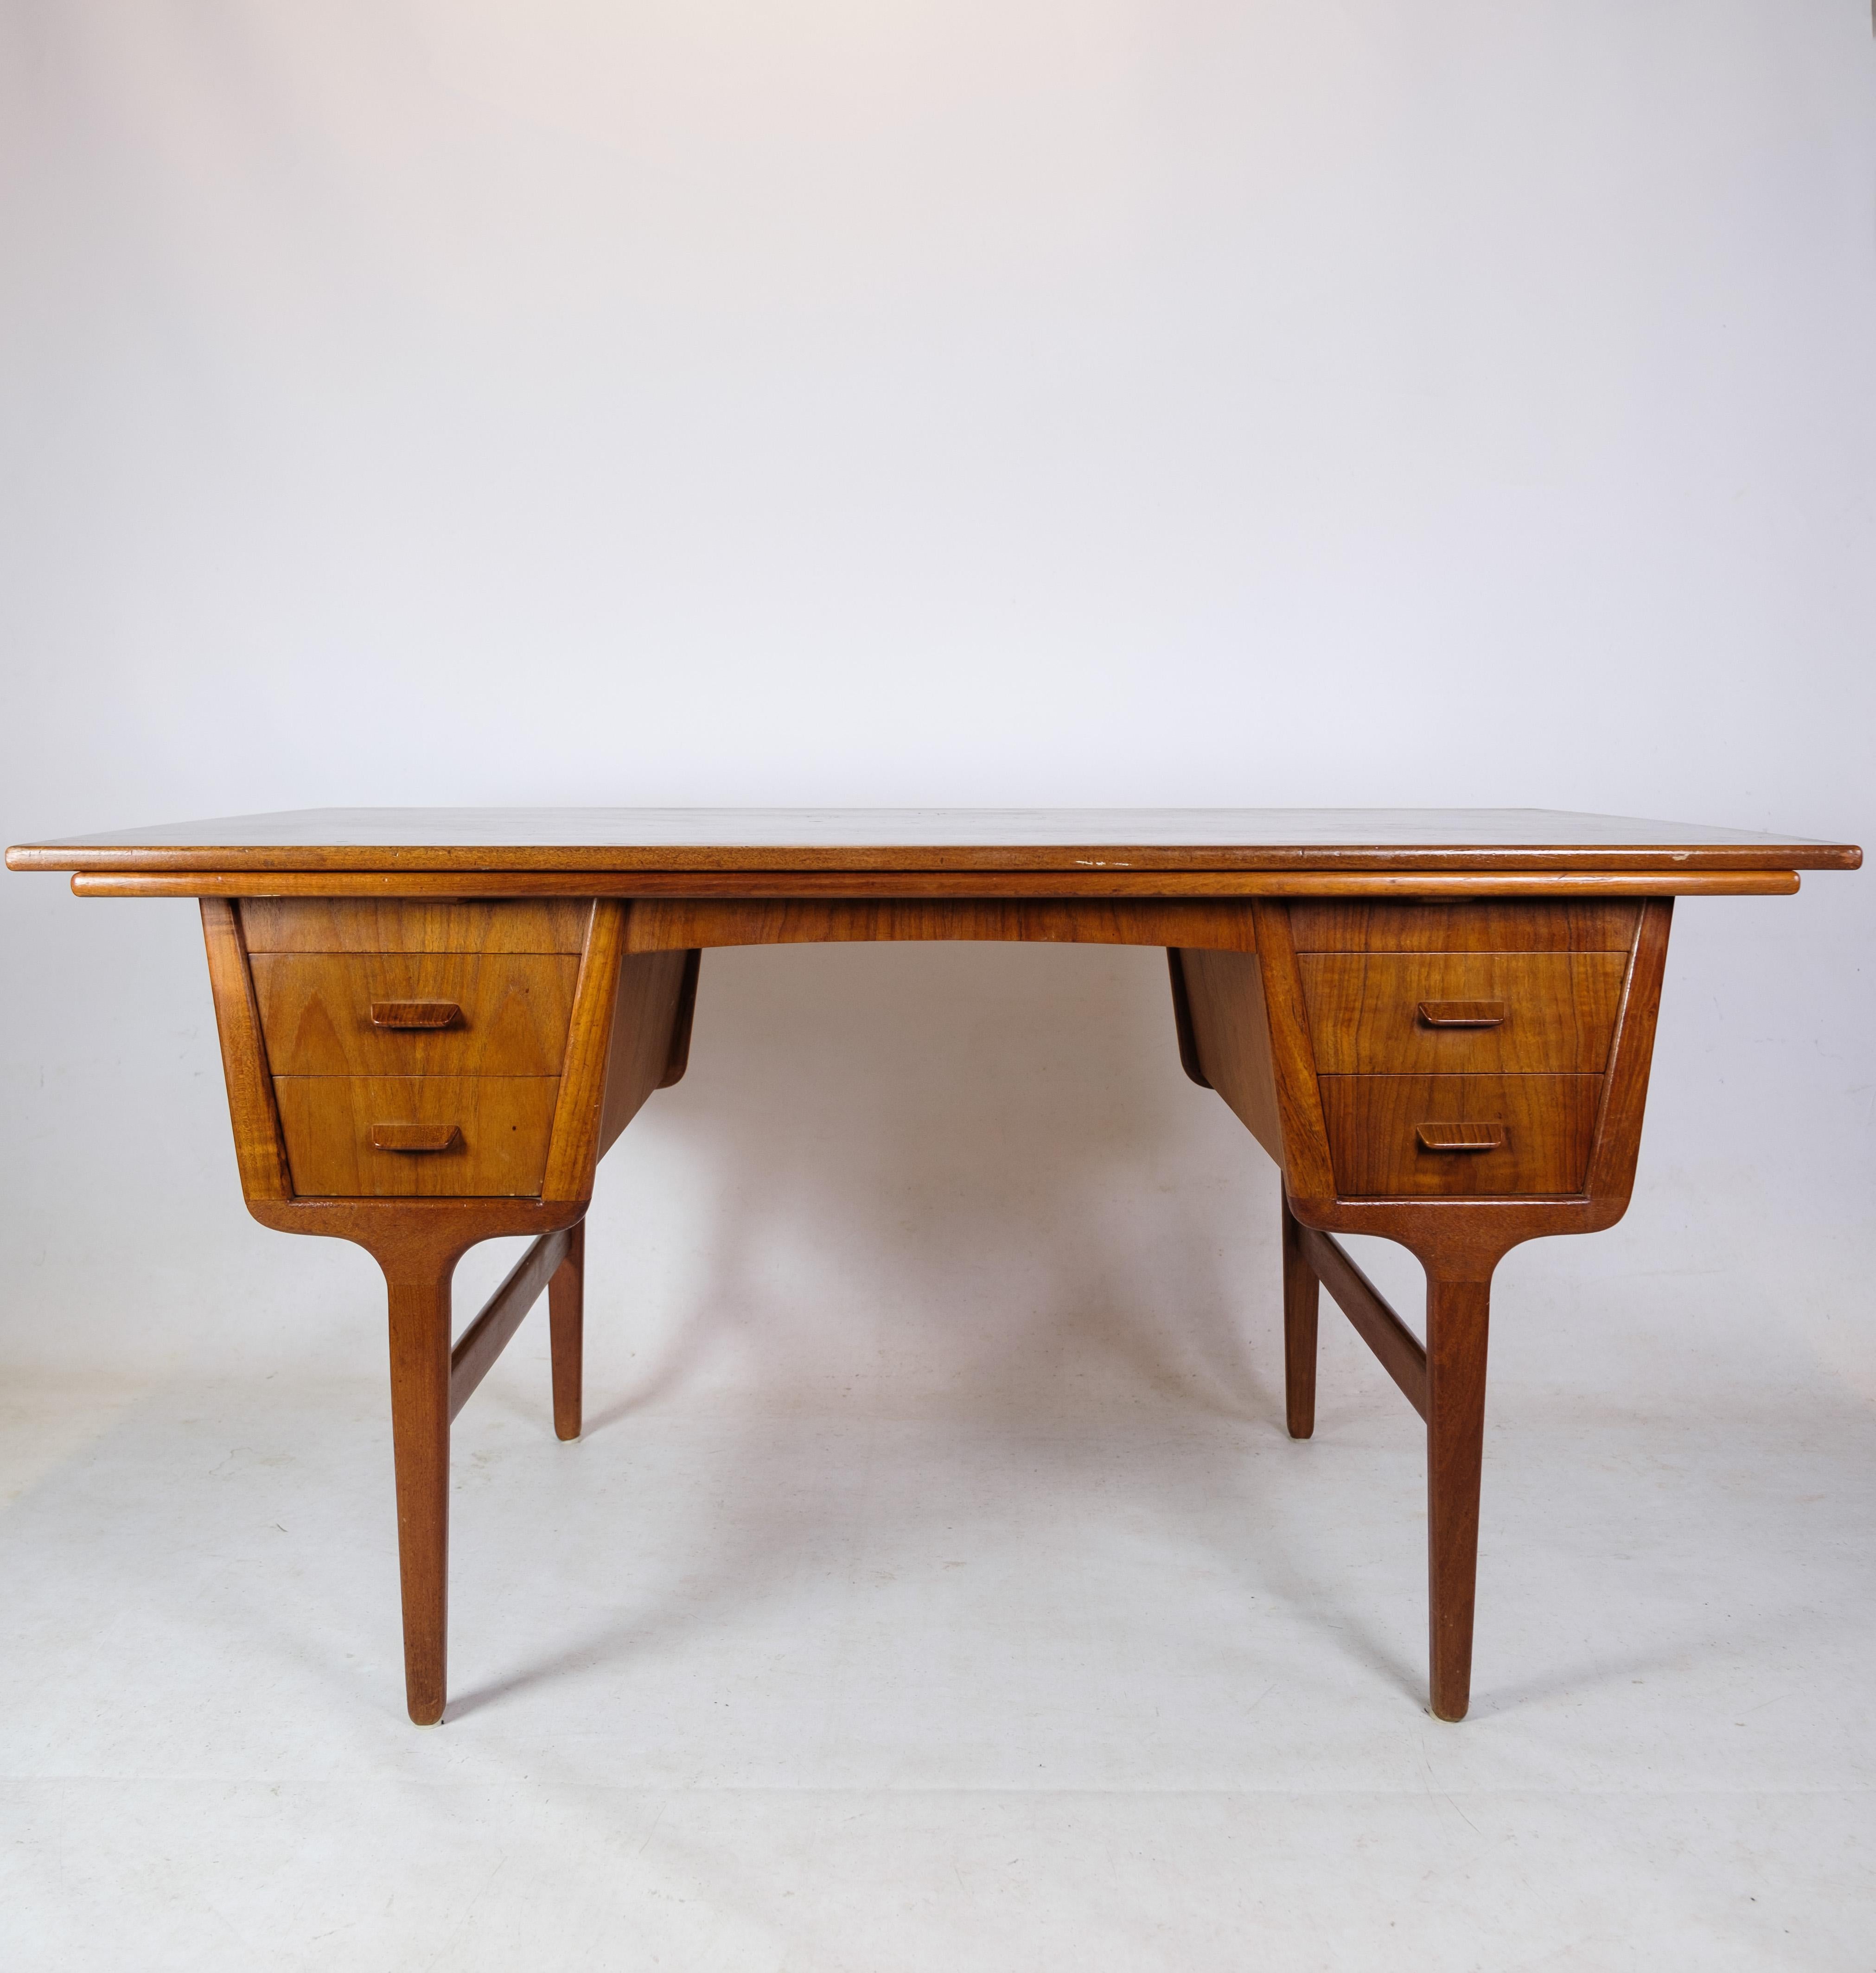 Desk / Dining table made of teak wood with a very unique design from Finland around the 1960s. The table has a Dutch pull-out where the plate is inside under the top plate. Incredibly functional design with 3 drawers on each side.
Measurements in